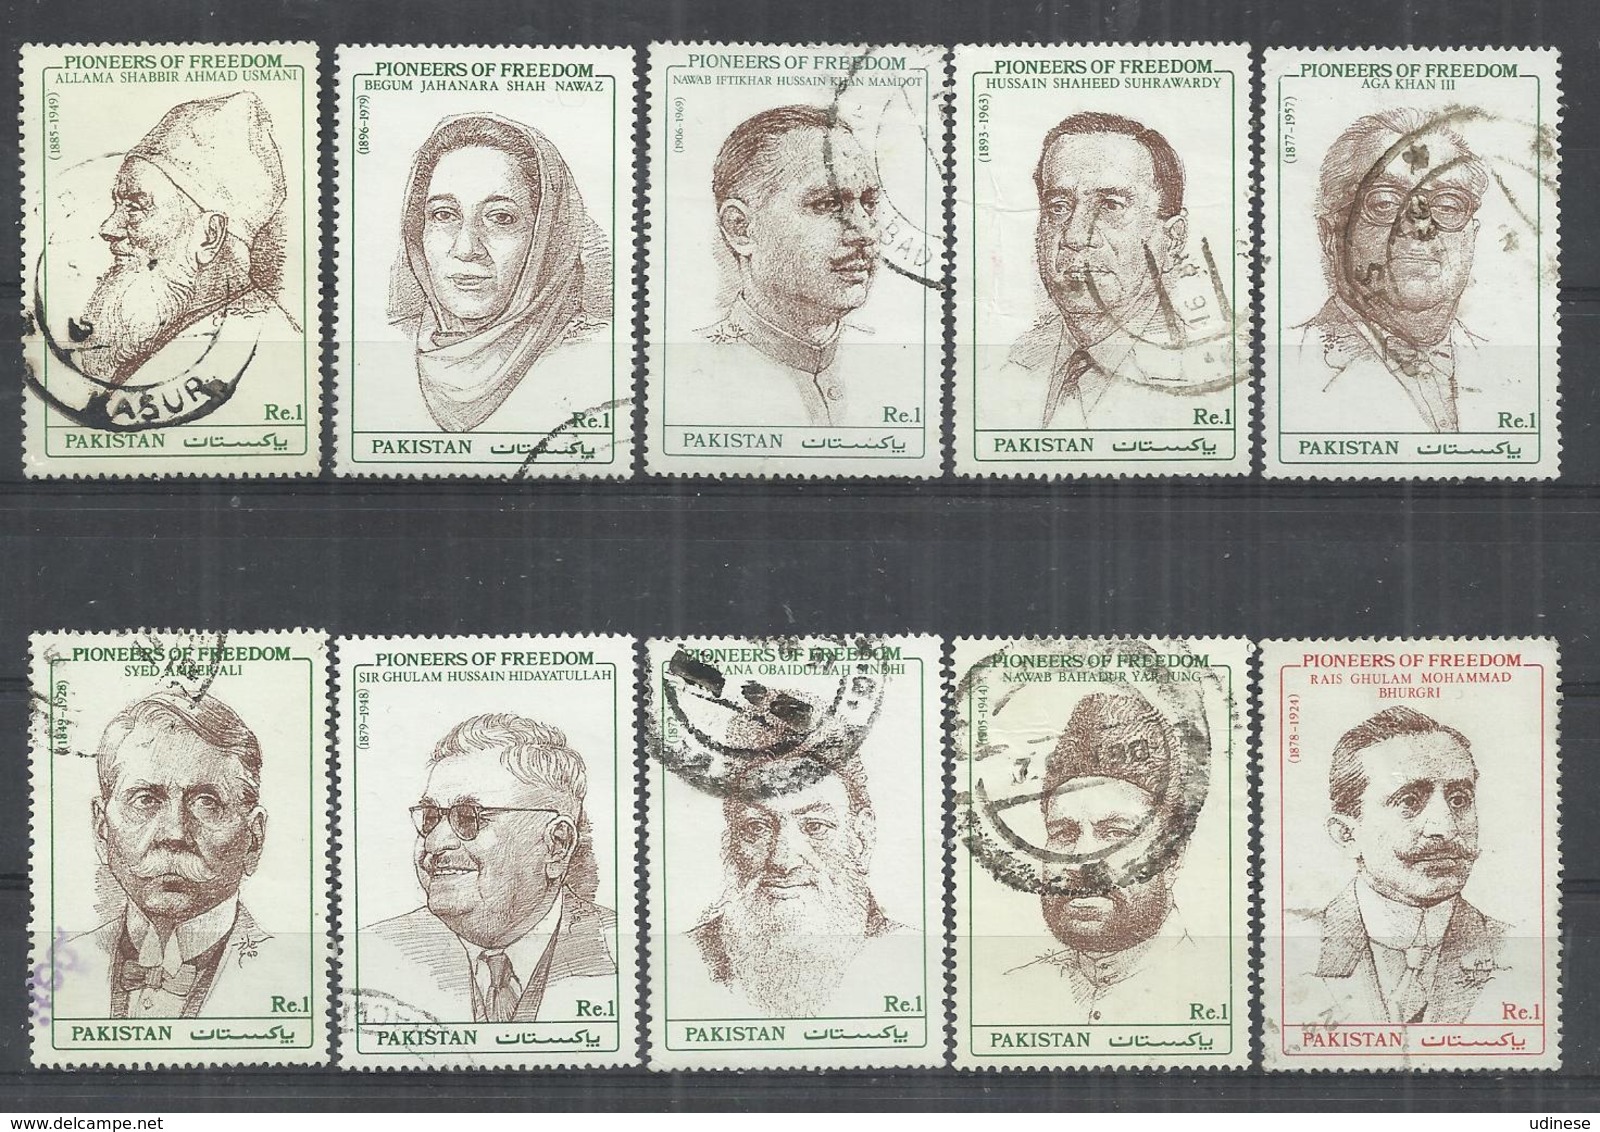 TEN AT A TIME - PAKISTAN 1990-1992 - PIONEERS OF FREEDOM -  LOT OF 10 DIFFERENT 2 - OBLITERE USED GESTEMPELT USADO - Pakistan